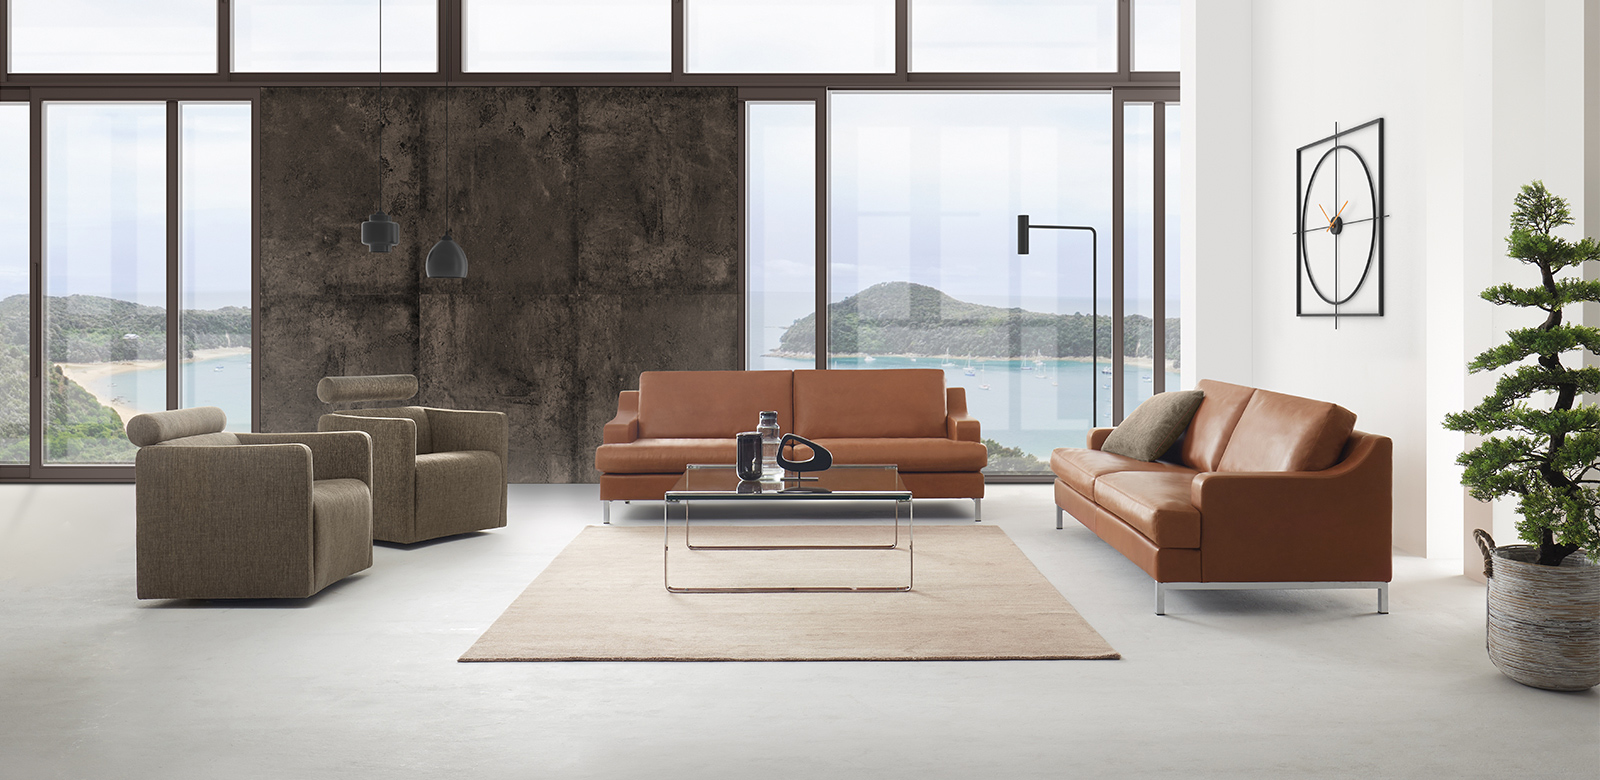 CL770 in brown leather with two armchairs in fabric in modern loft living room with lake view